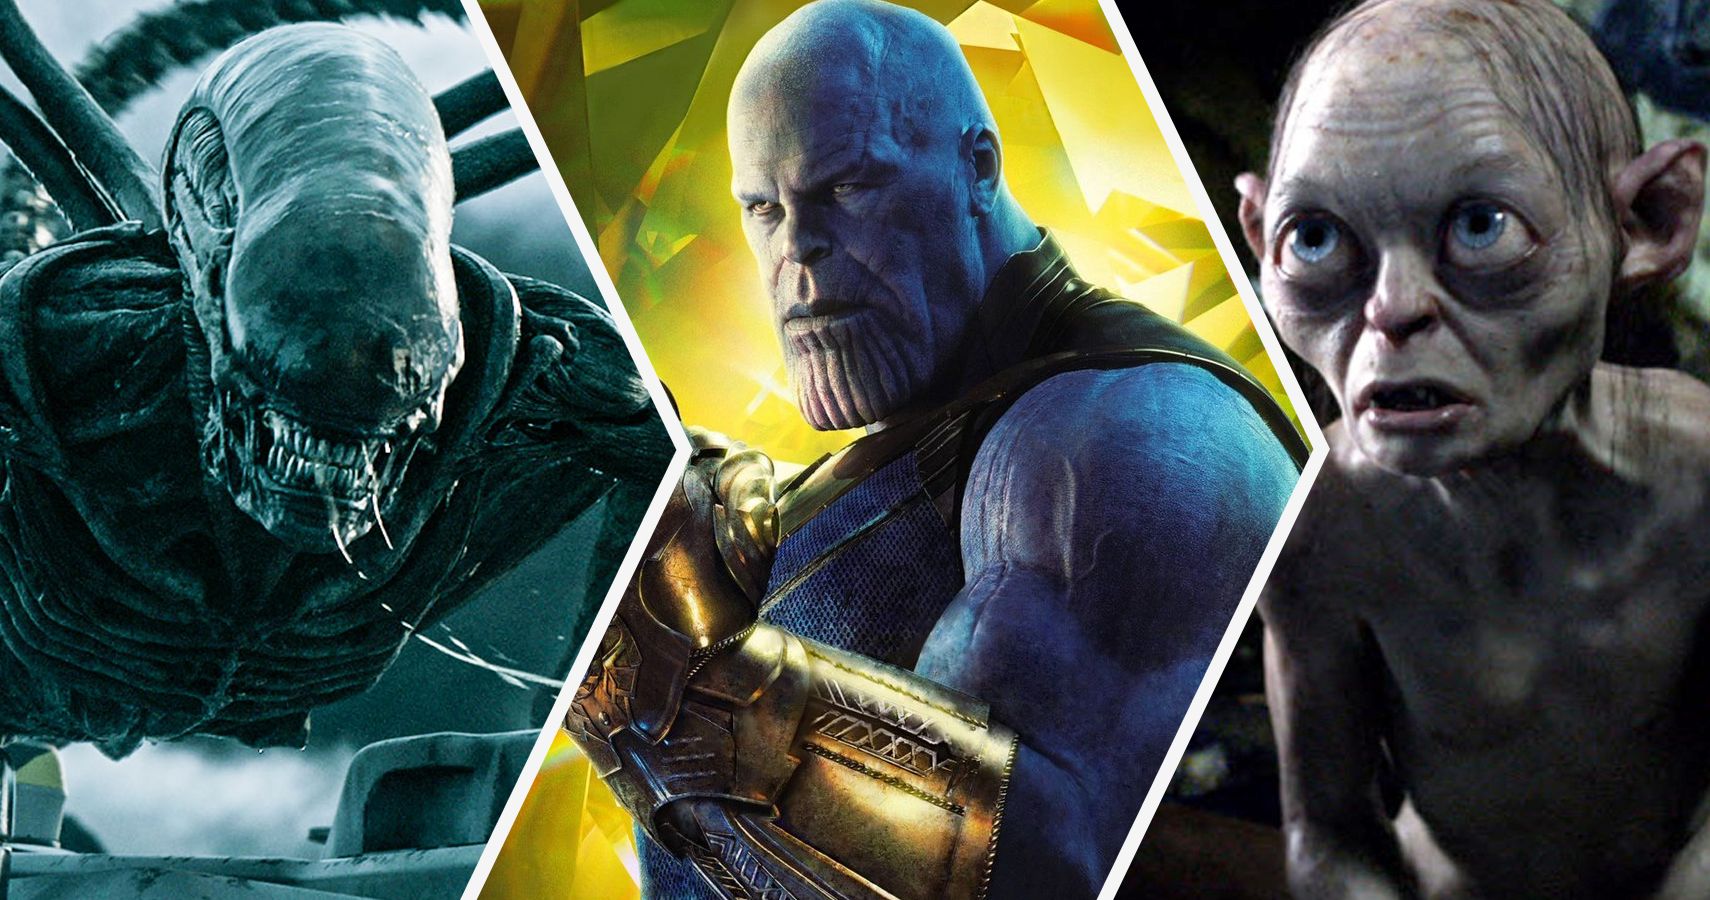 15 CGI Villains That Hurt Their Movies (And 10 That Saved Them)